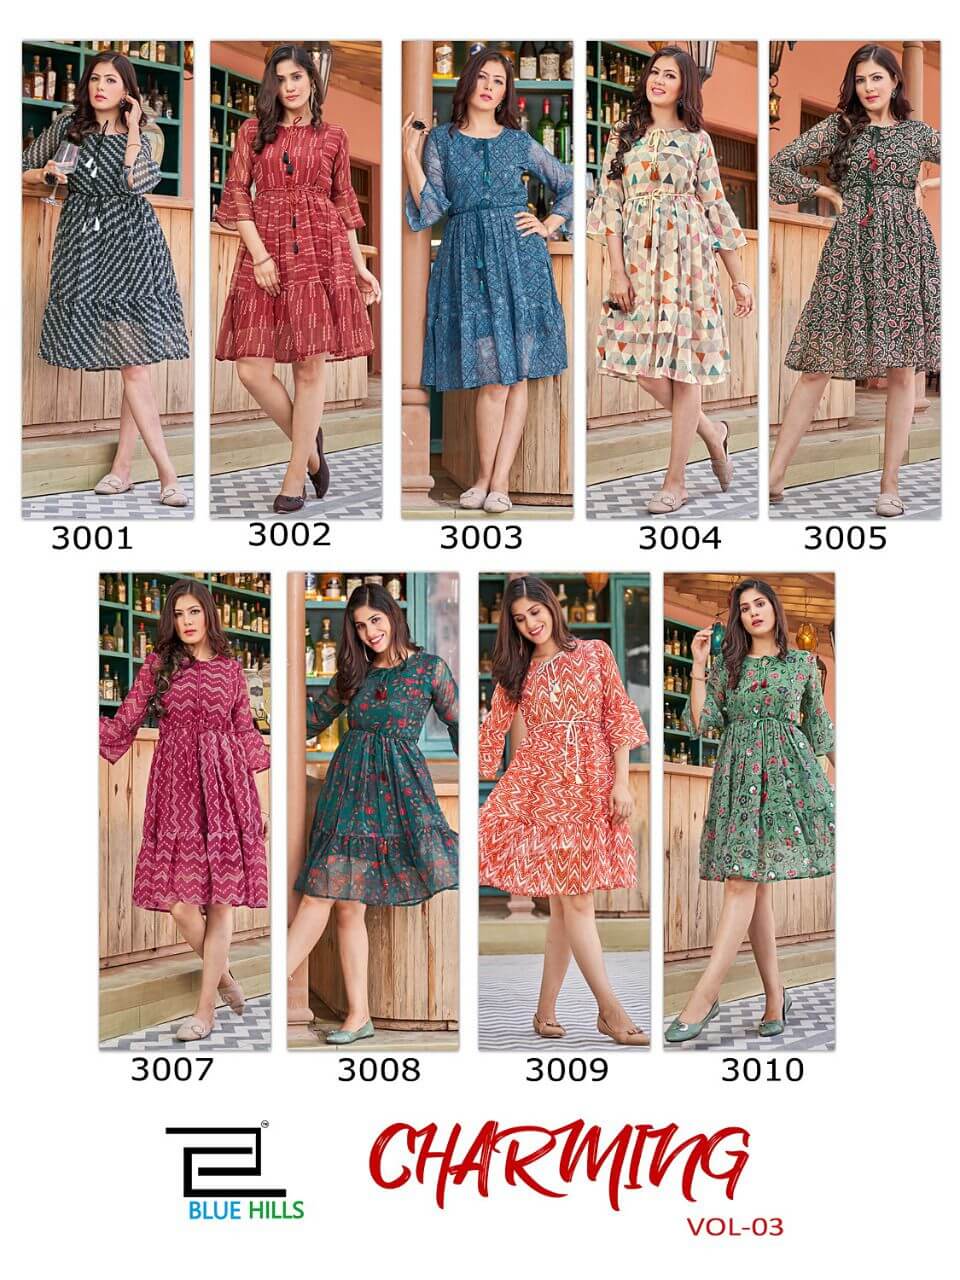 Blue Hills Charming vol 3 One Piece Dress Catalog collection 5